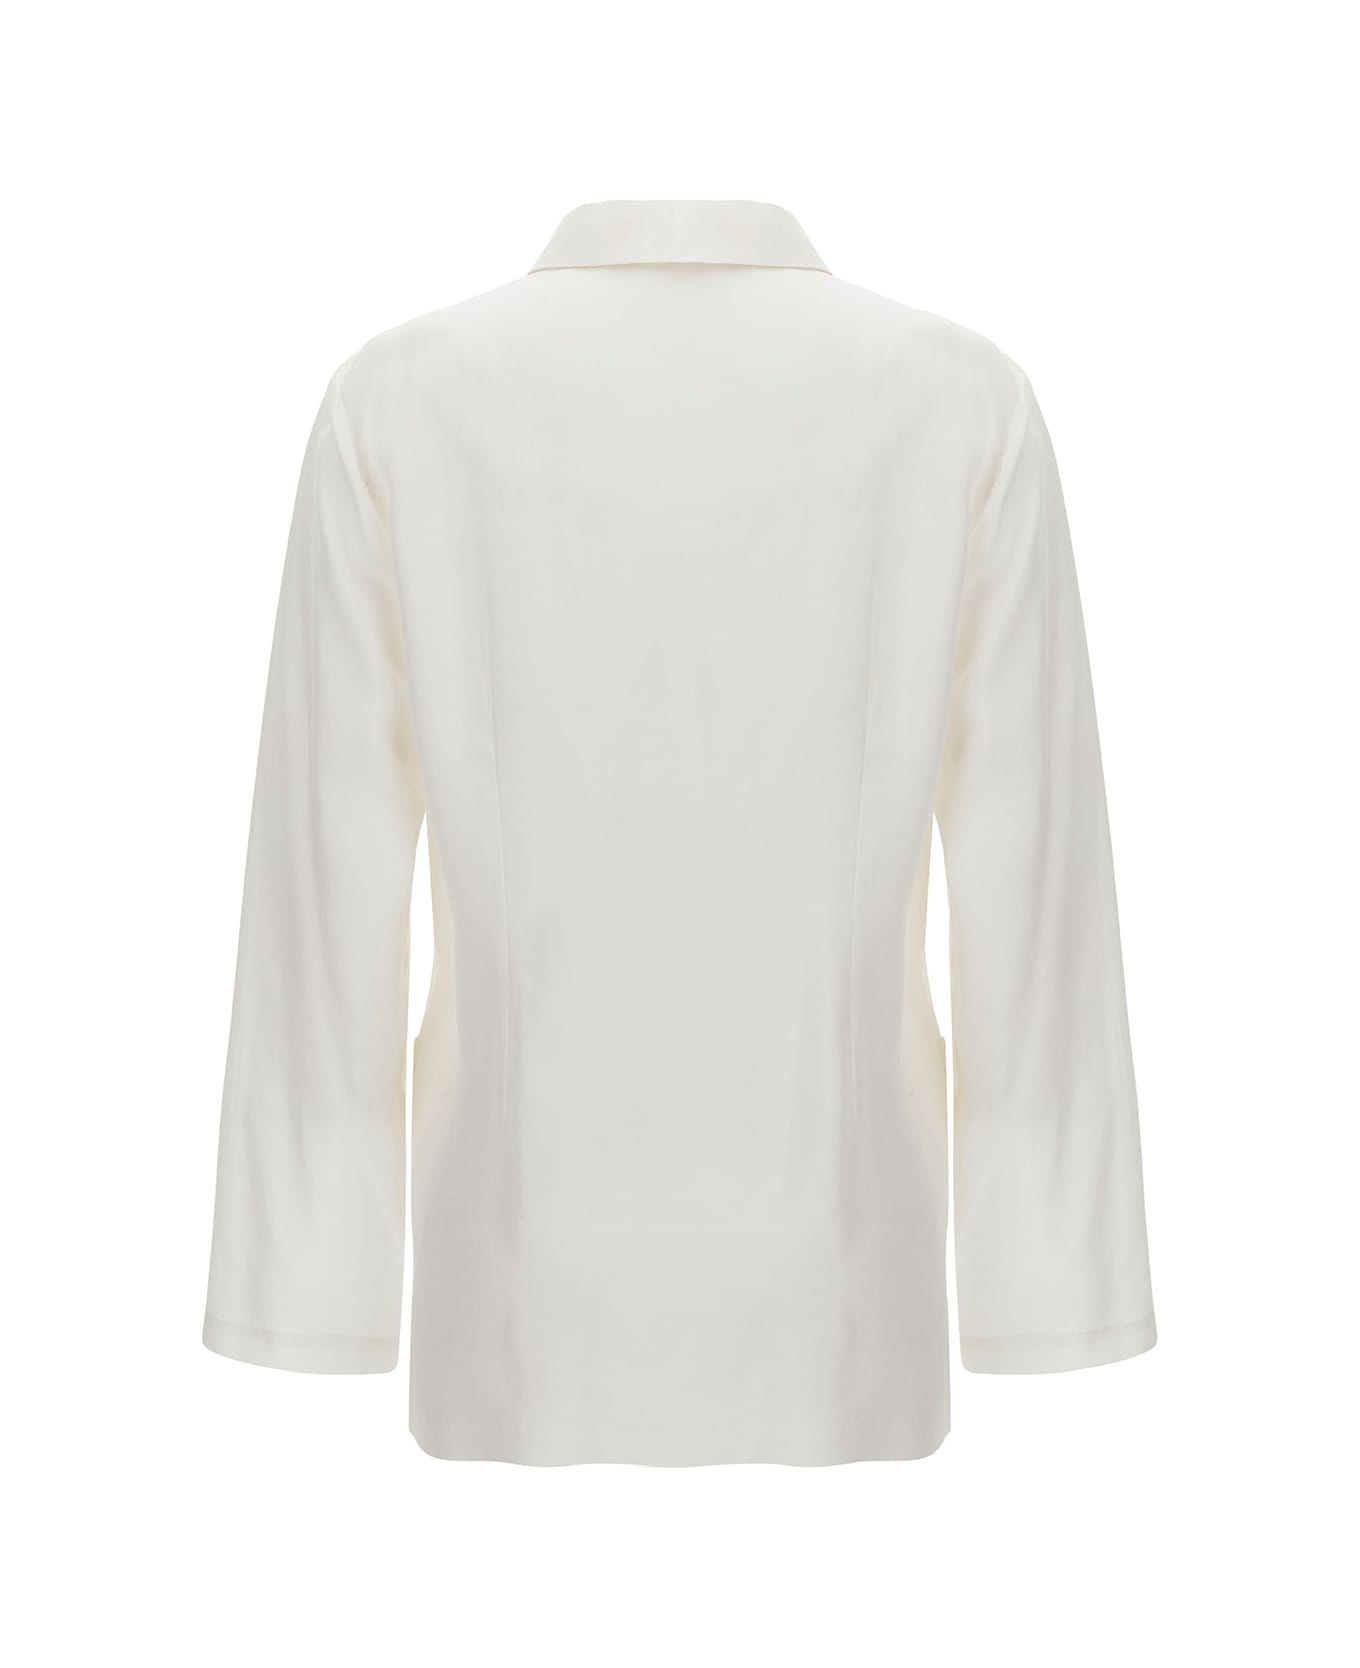 Parosh White Single-breasted Jacket With Mother-of-pearls Buttons In Silk Woman - White ブレザー